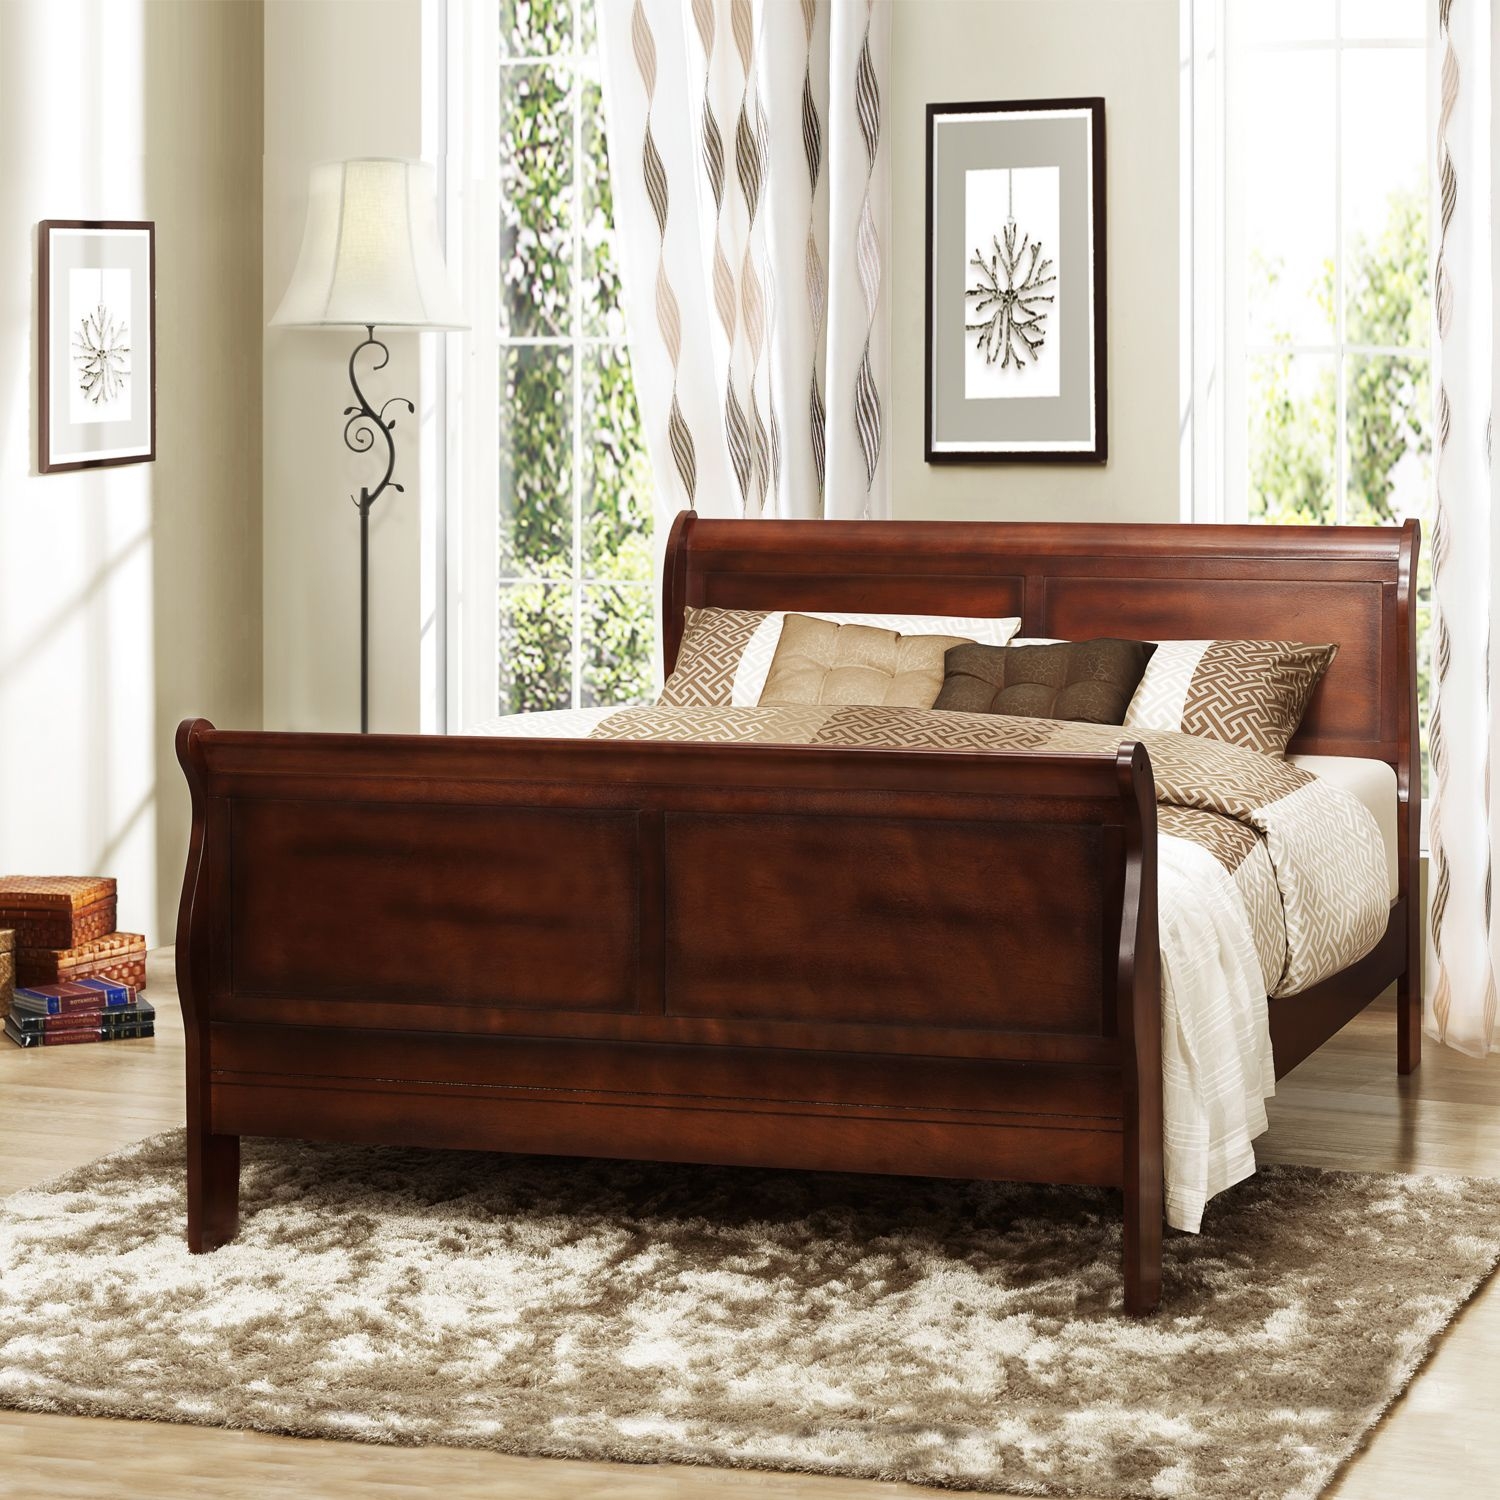 Cherry Wood Finish Queen-size Sleigh Bed Traditional Bedroom Furniture